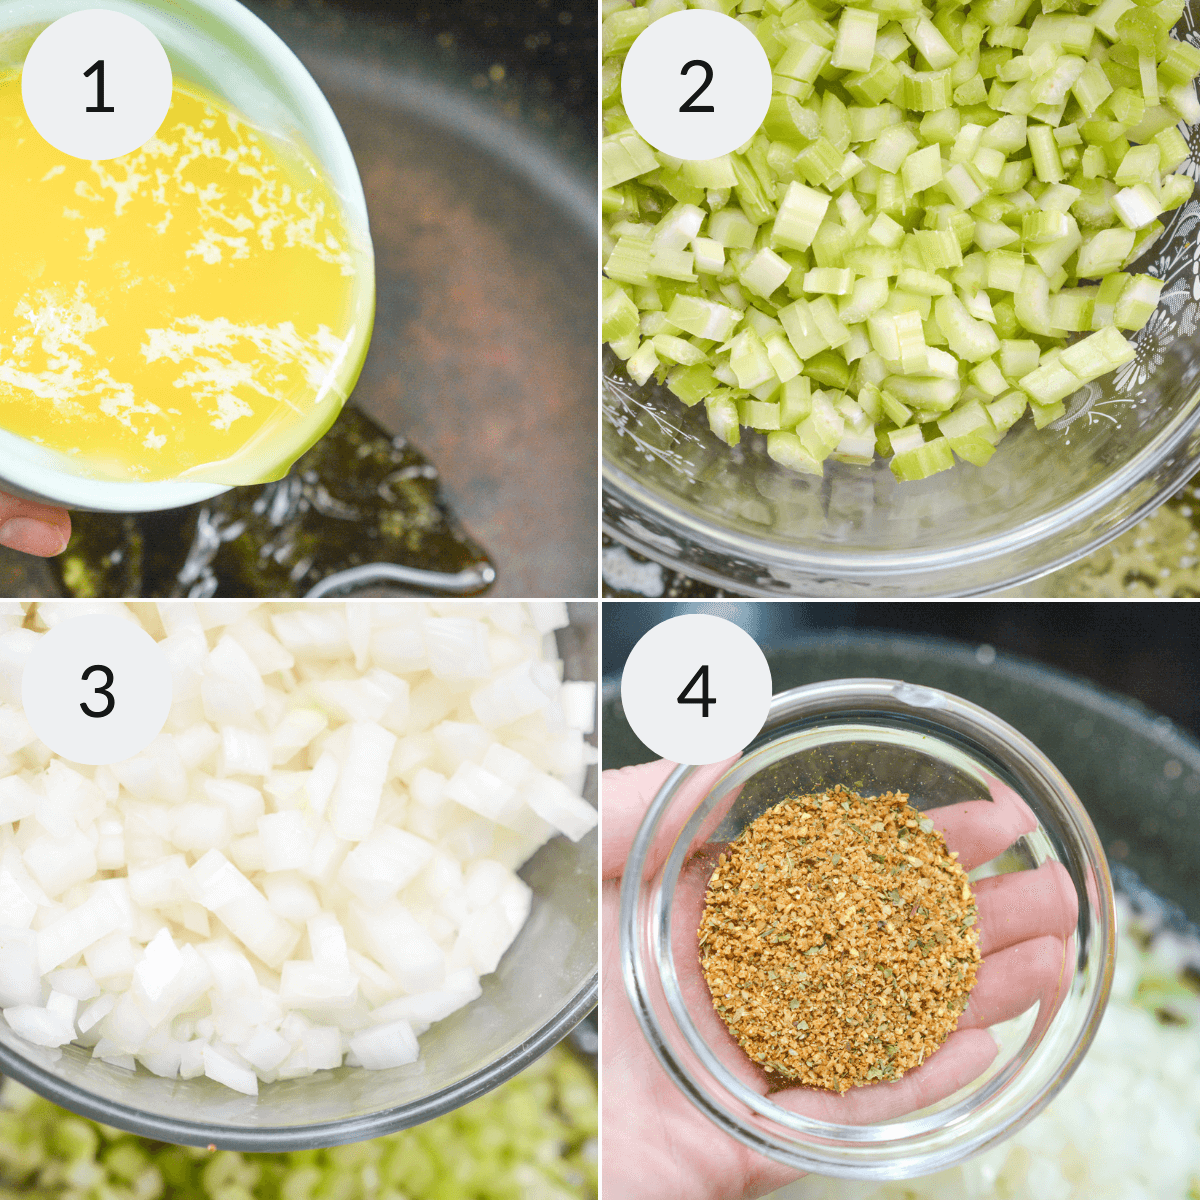 Step by step instructions for making sage and onion stuffing recipe.